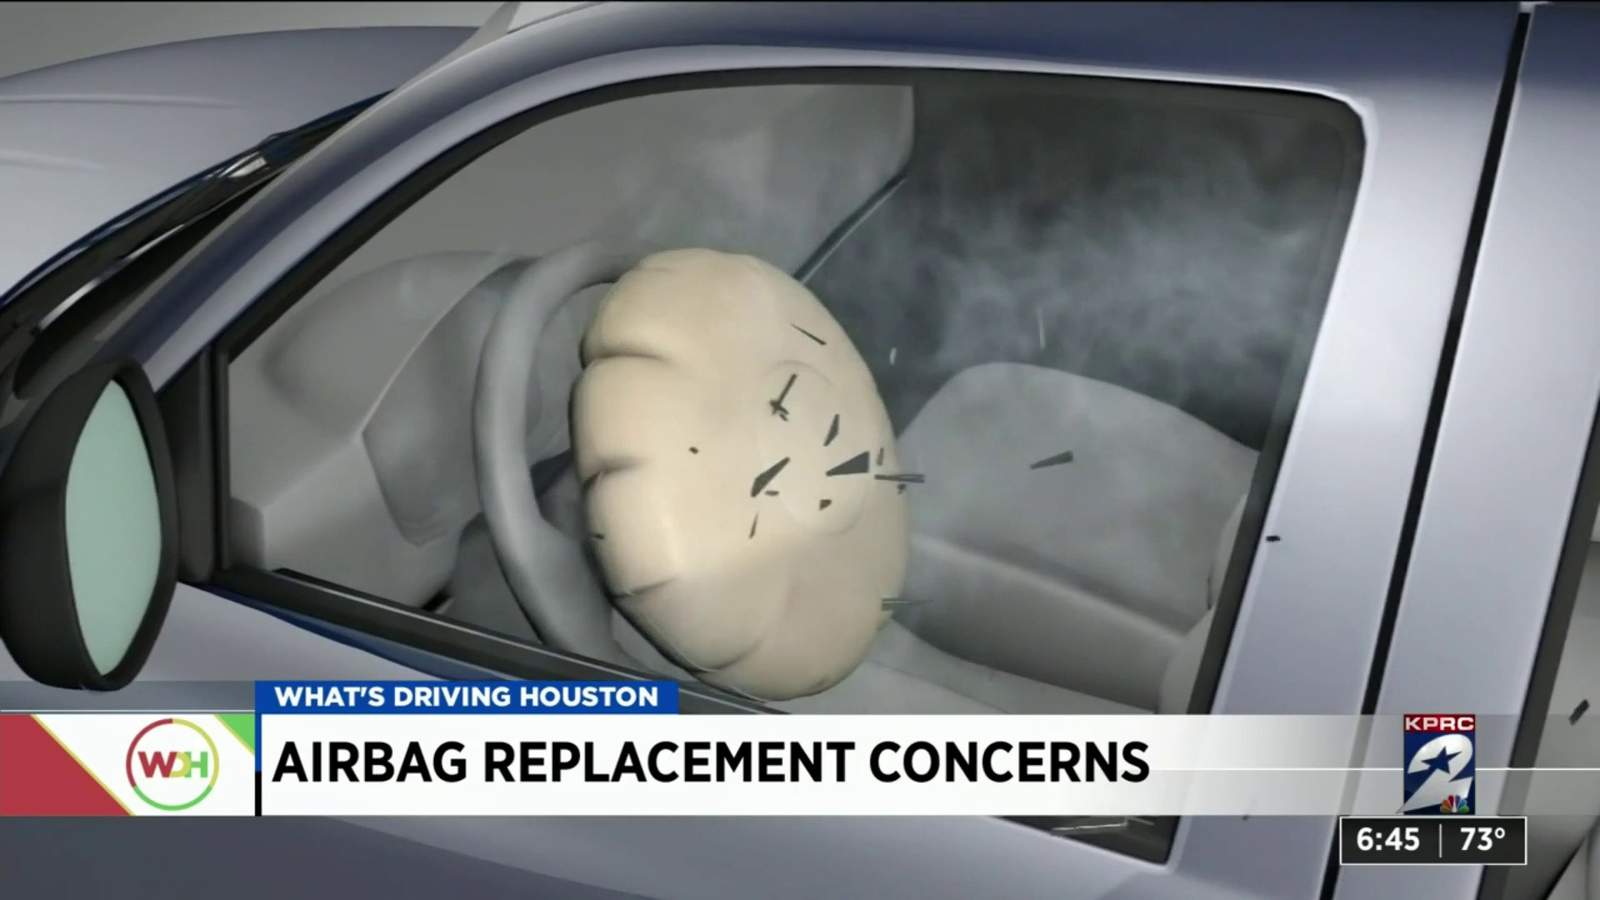 More than 400,000 unsafe airbags remain in vehicles on Houston-area roads